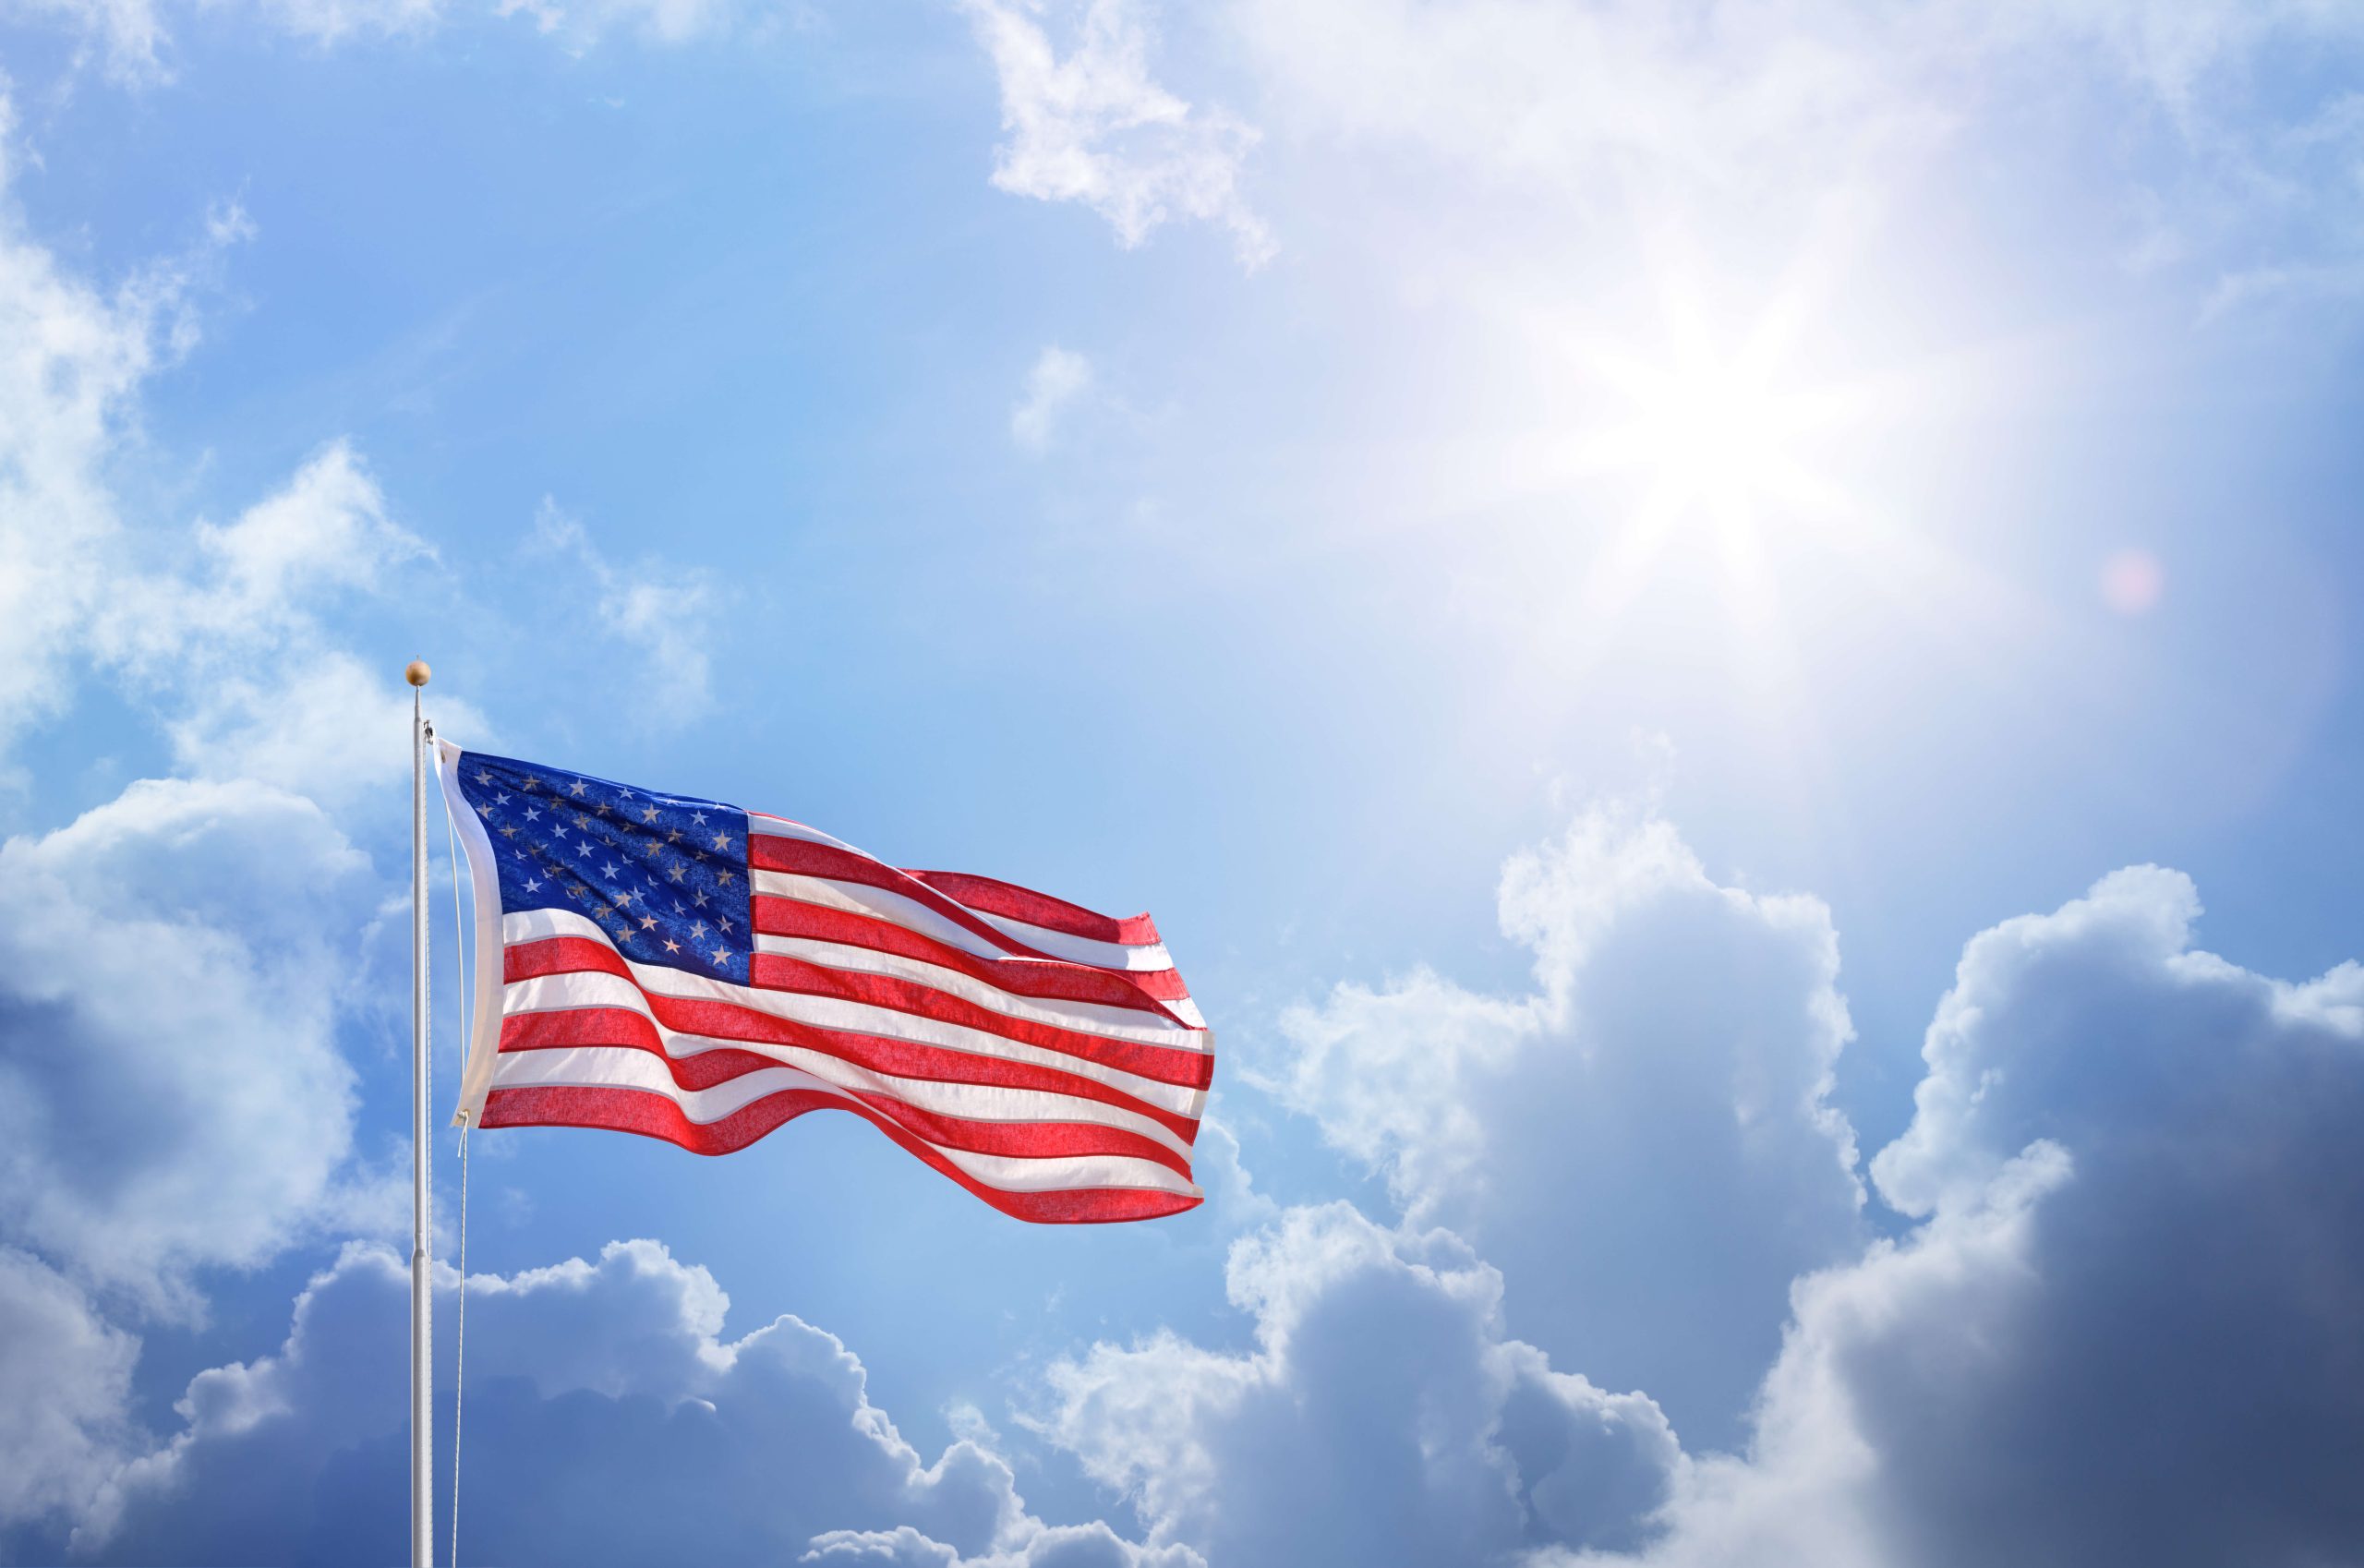 United States flag waving from a flagpole in front of a partially cloudy sky with the sun out